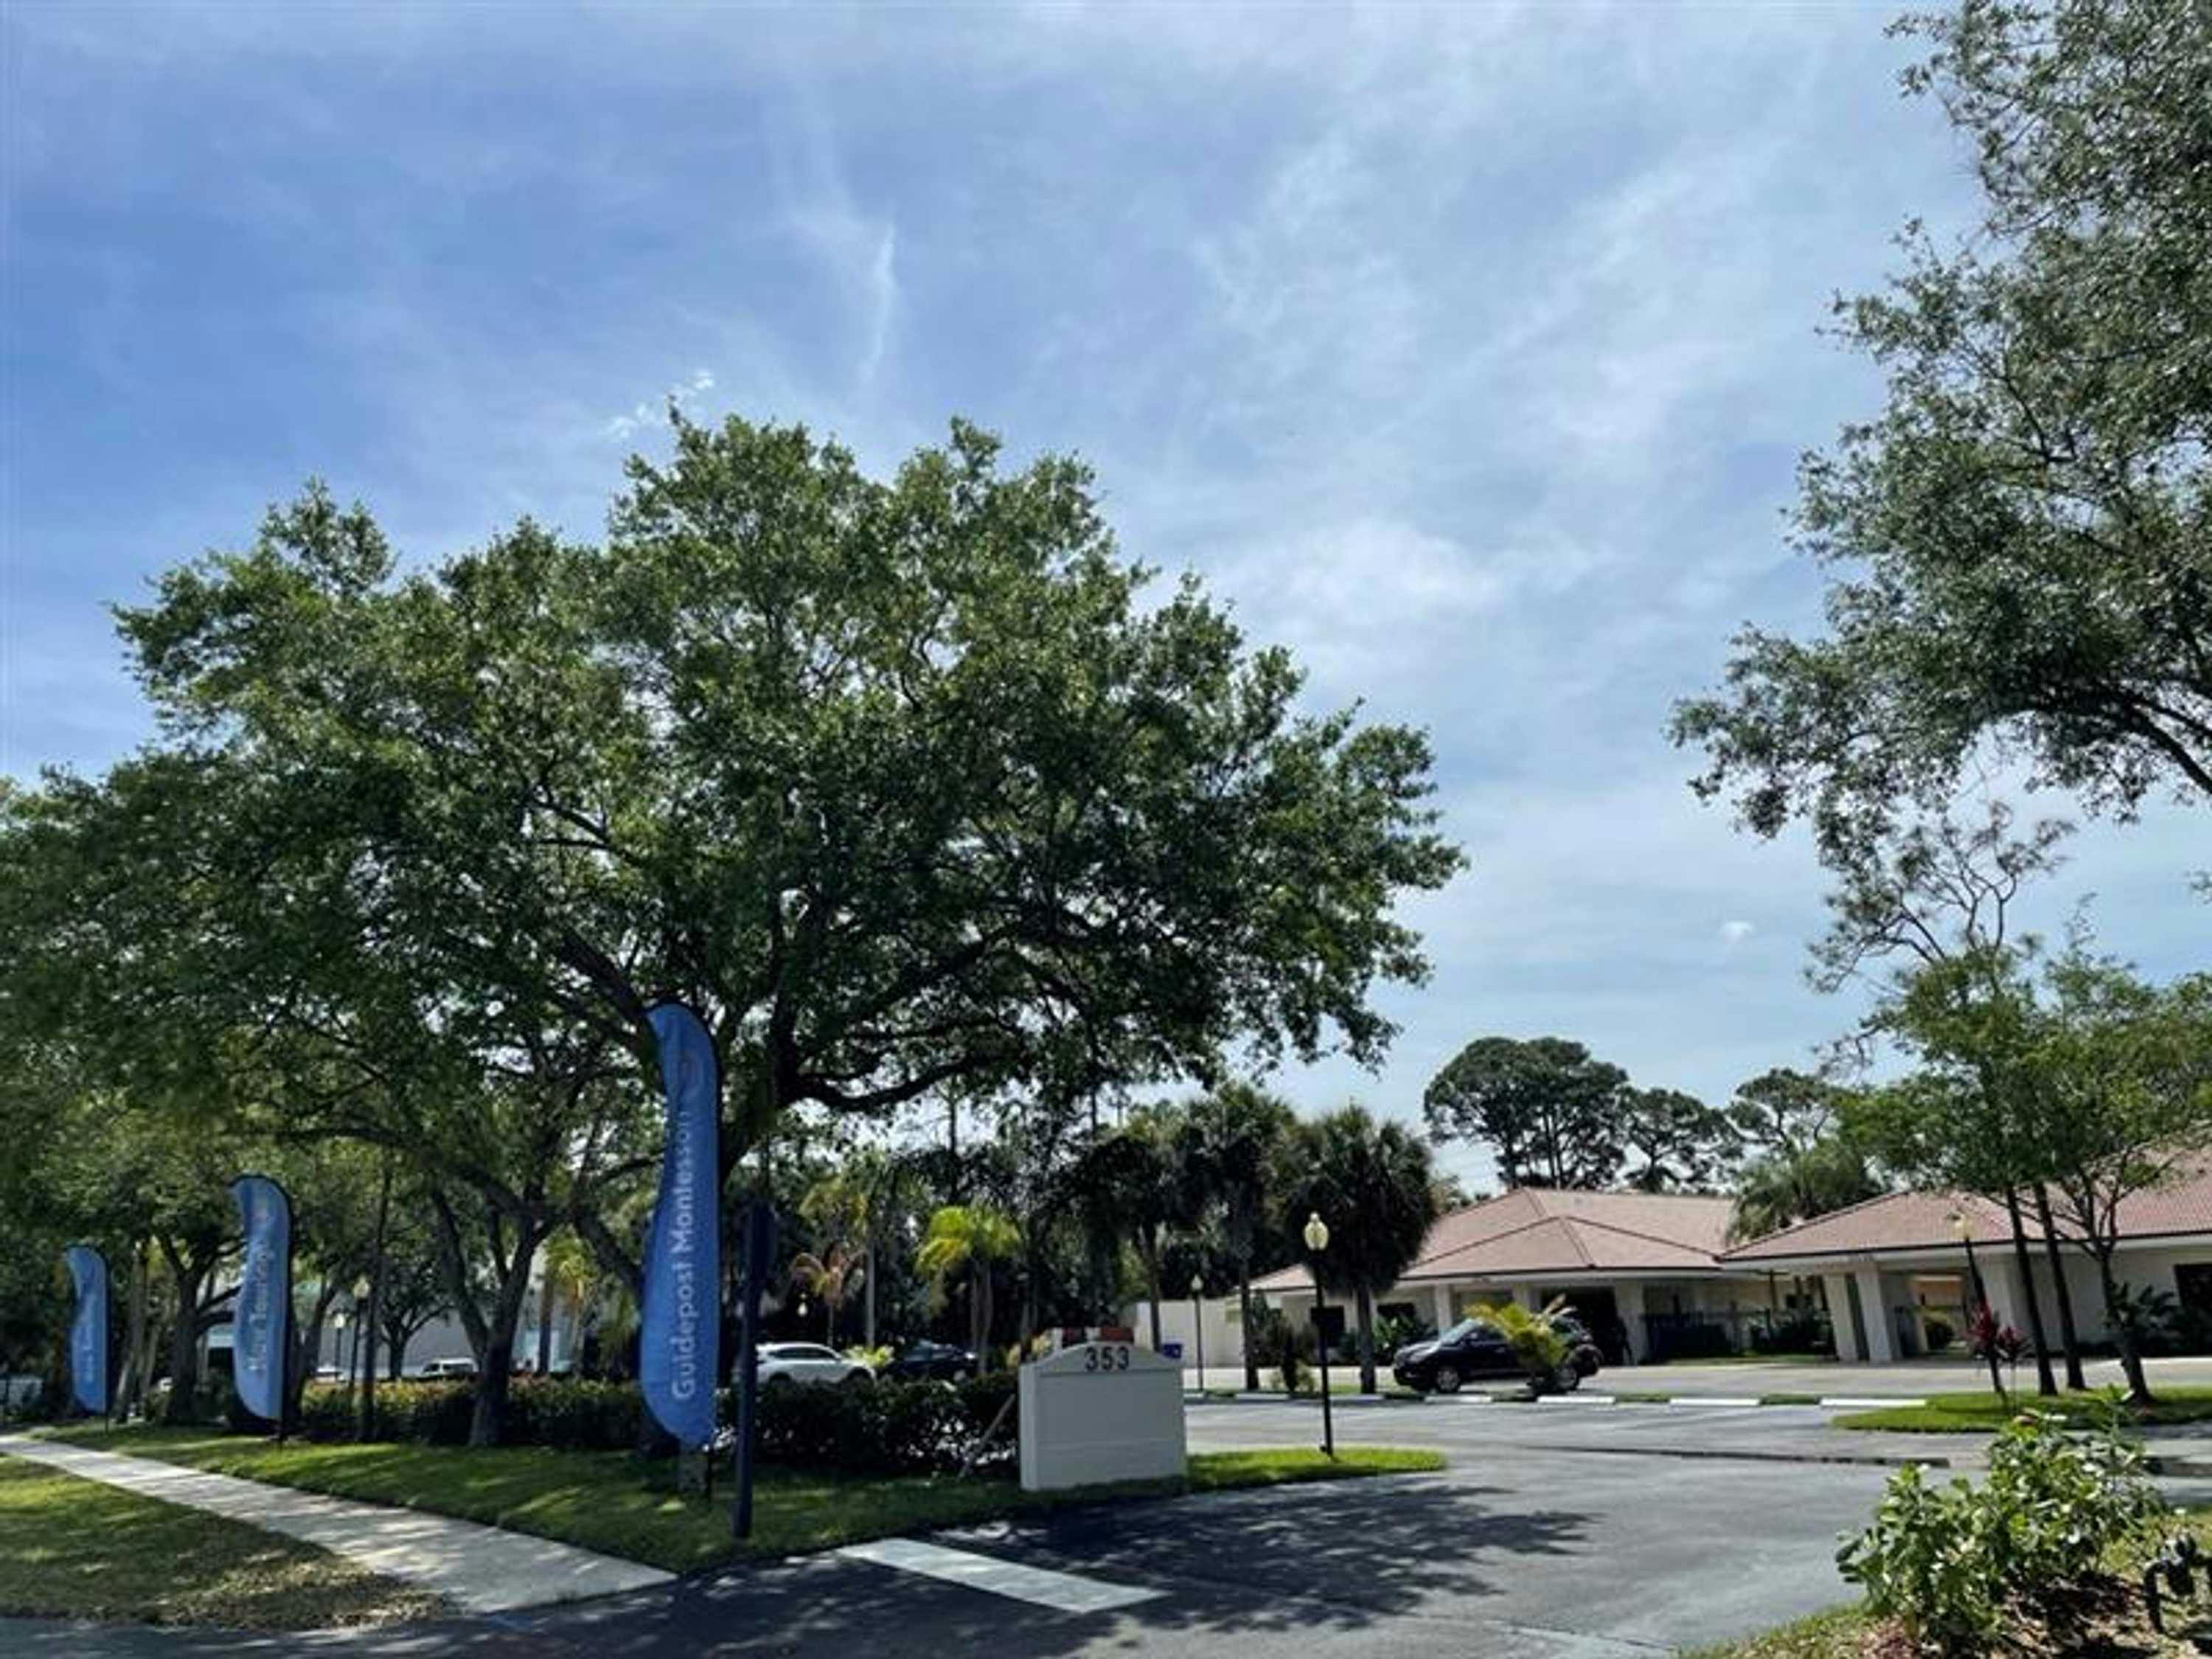 View of Guidepost Montessori at Palm Beach Gardens from the street that shows the shaded parking lot with the campus looming in the background. Branded Guidepost feather banners line the sidewalk to the parking lot entrance.